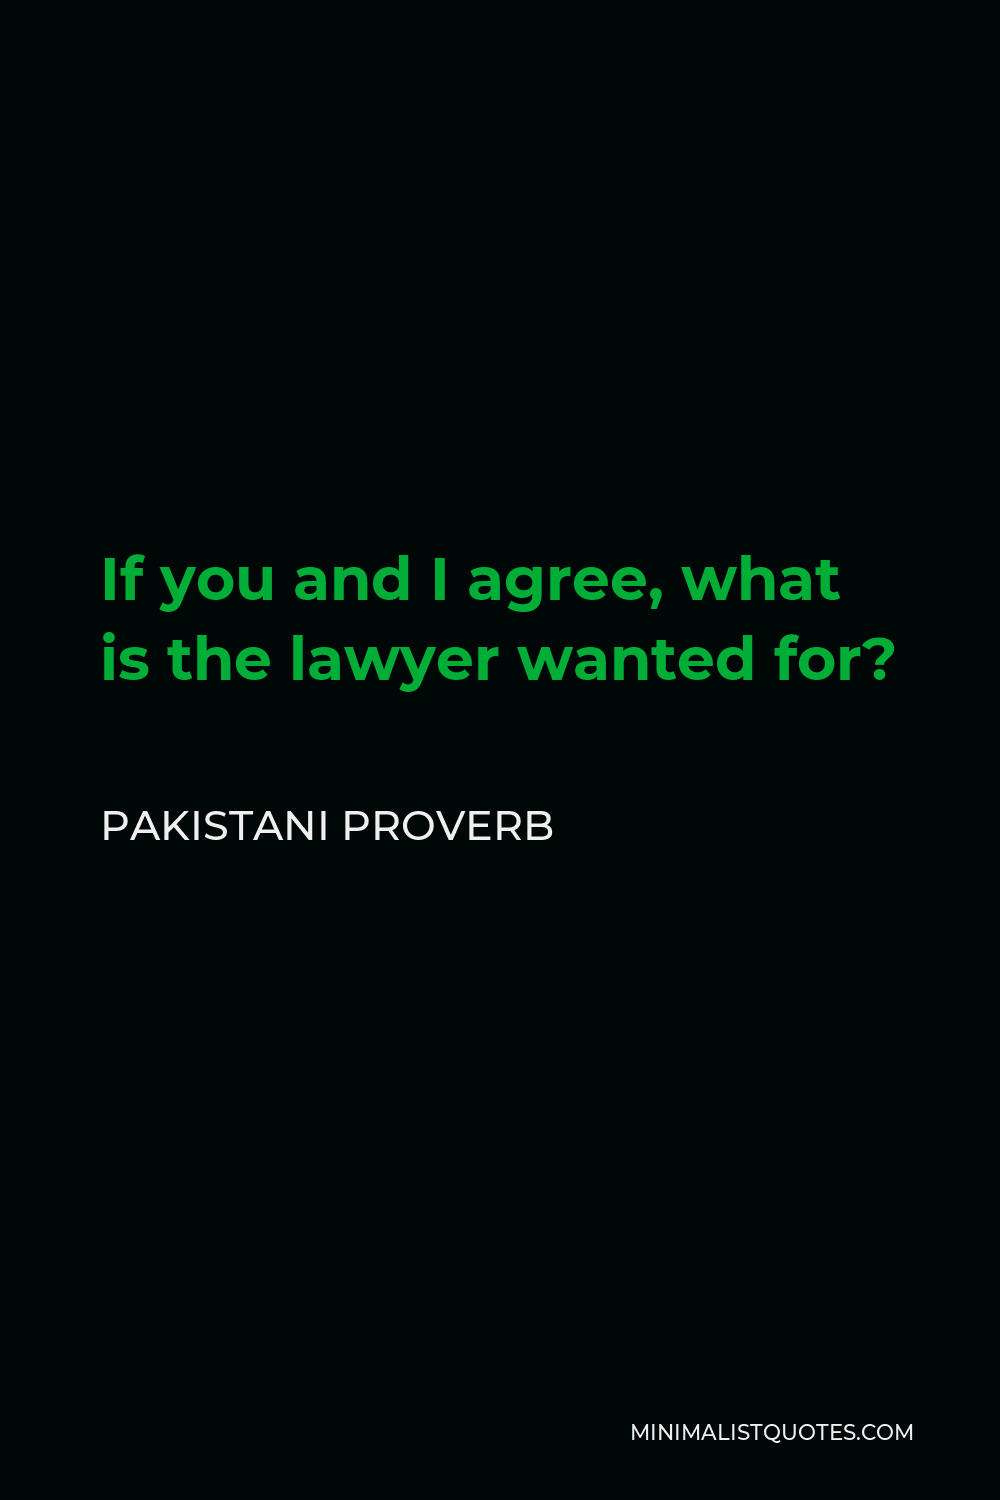 Pakistani Proverb Quote - If you and I agree, what is the lawyer wanted for?